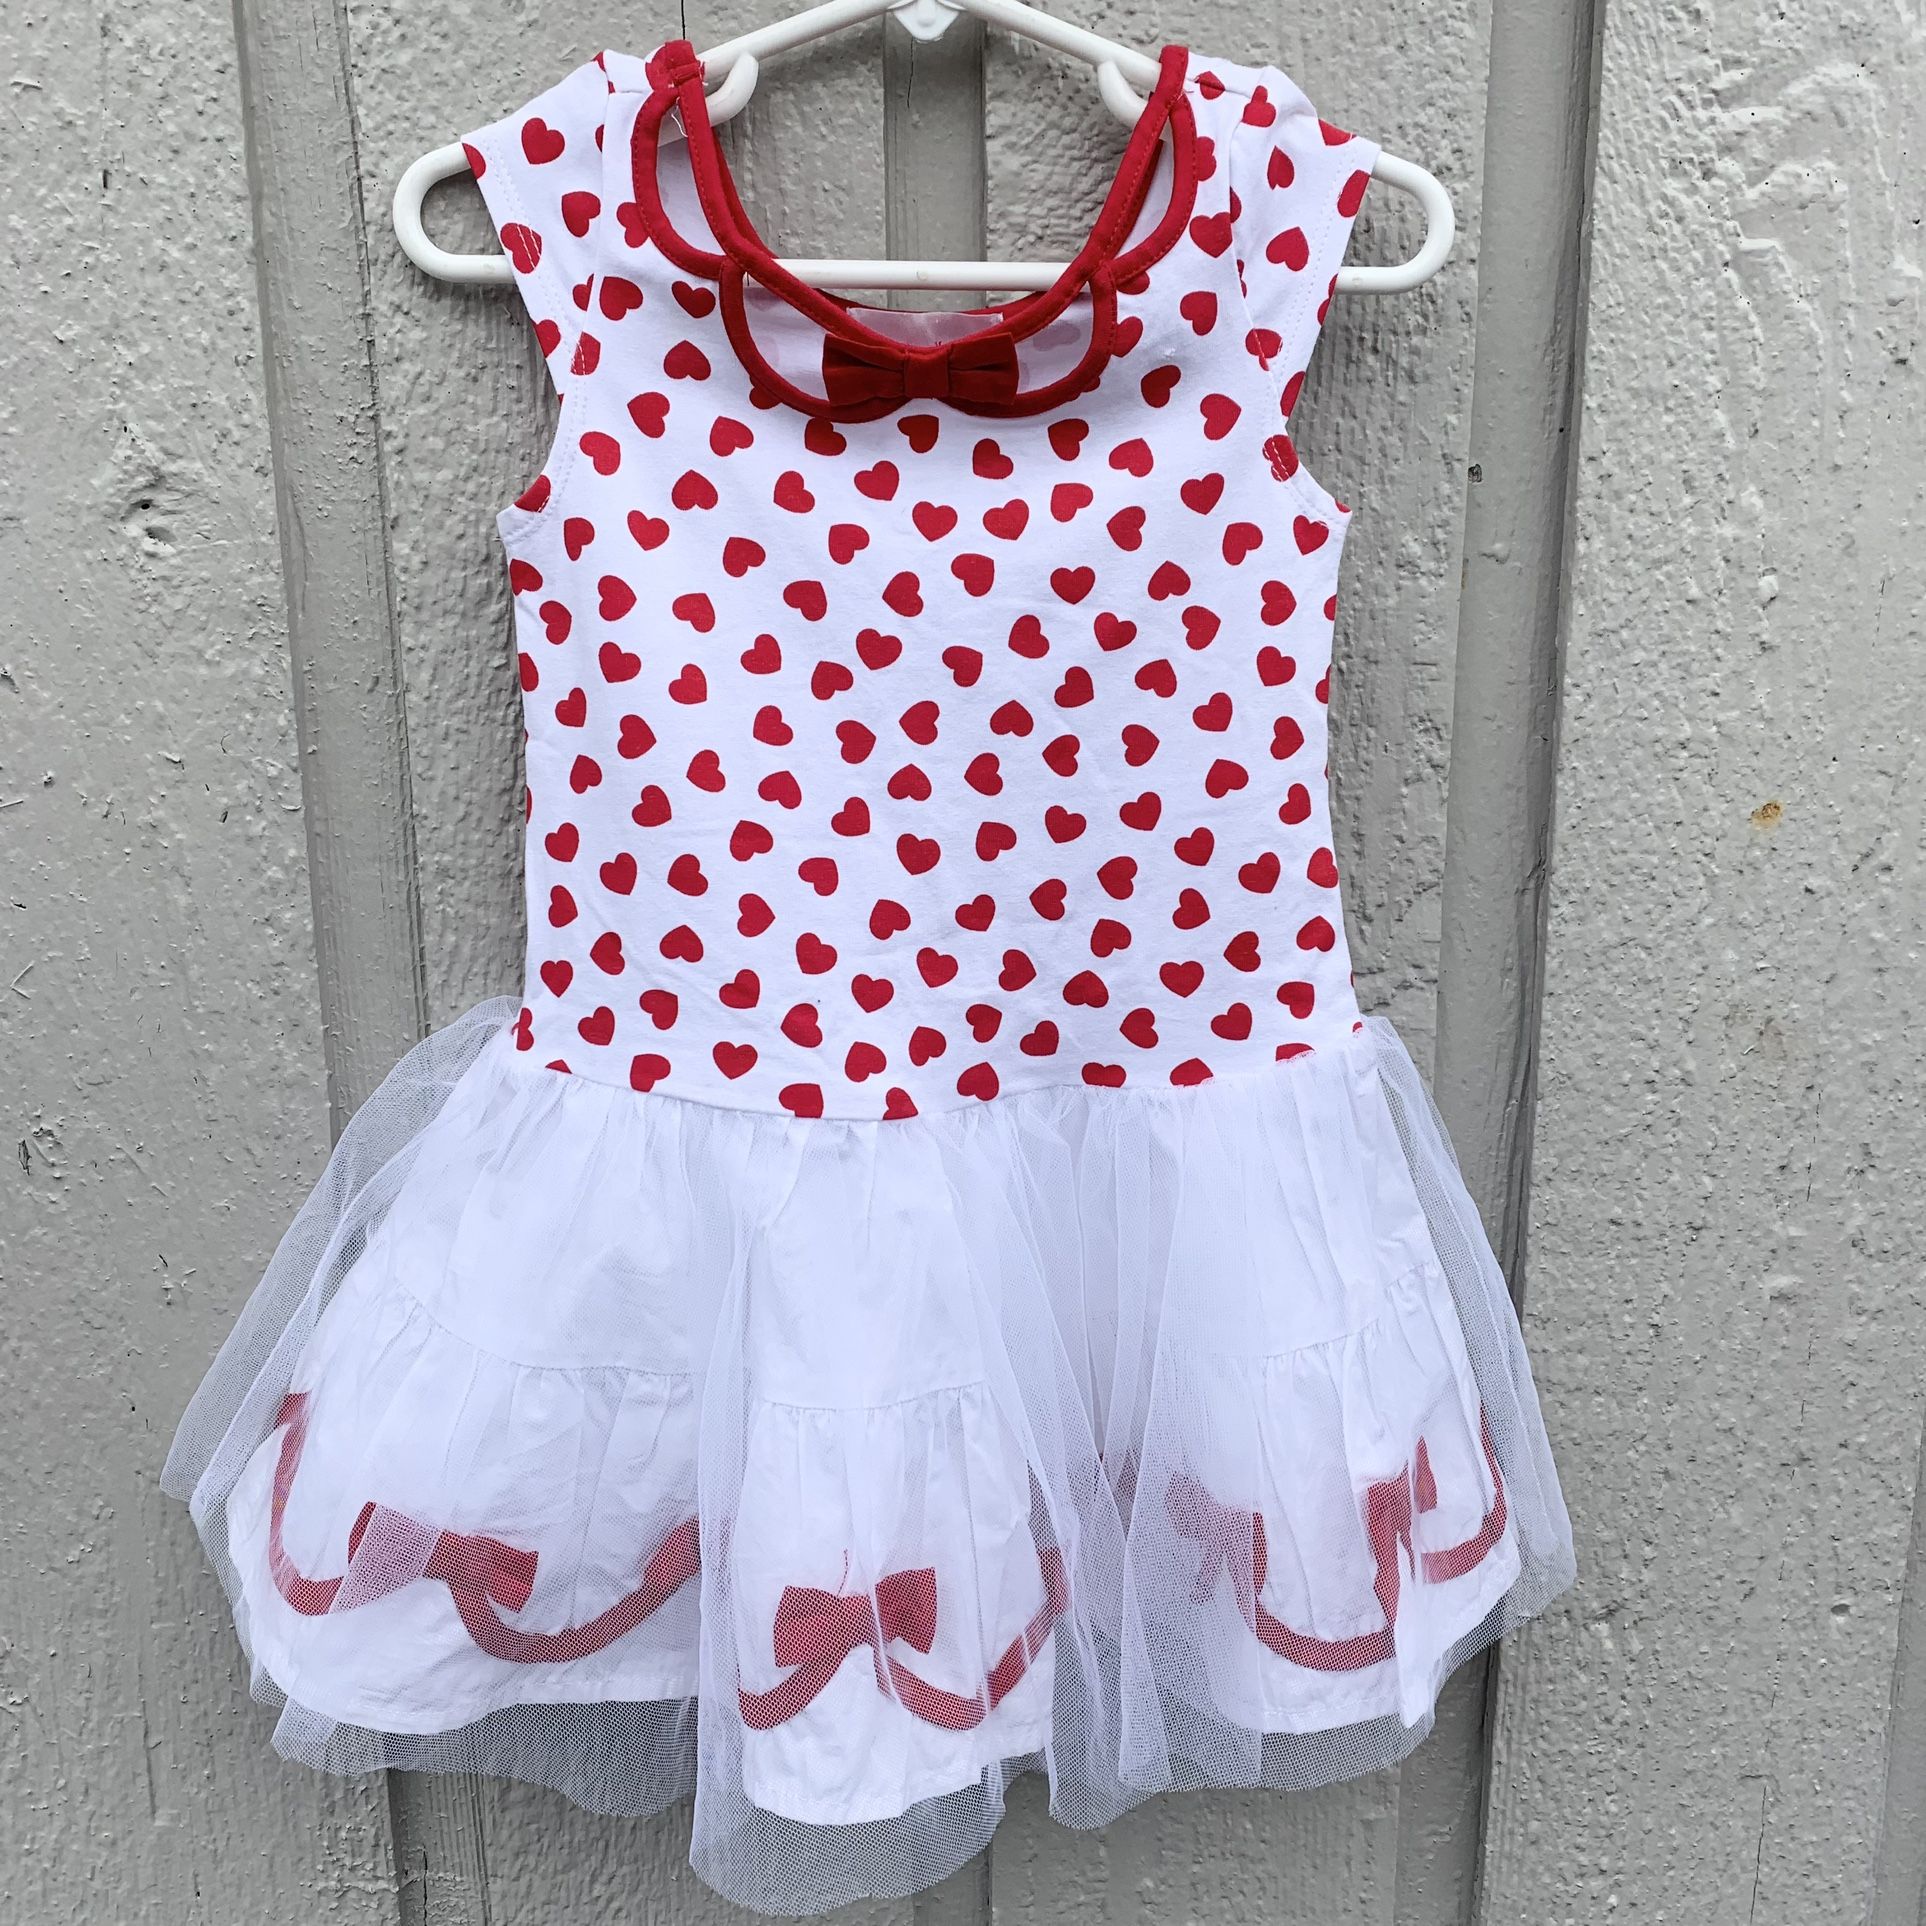 NEW Biscotti girl tulle dress heart print cutout neckline Size 2T/3T 